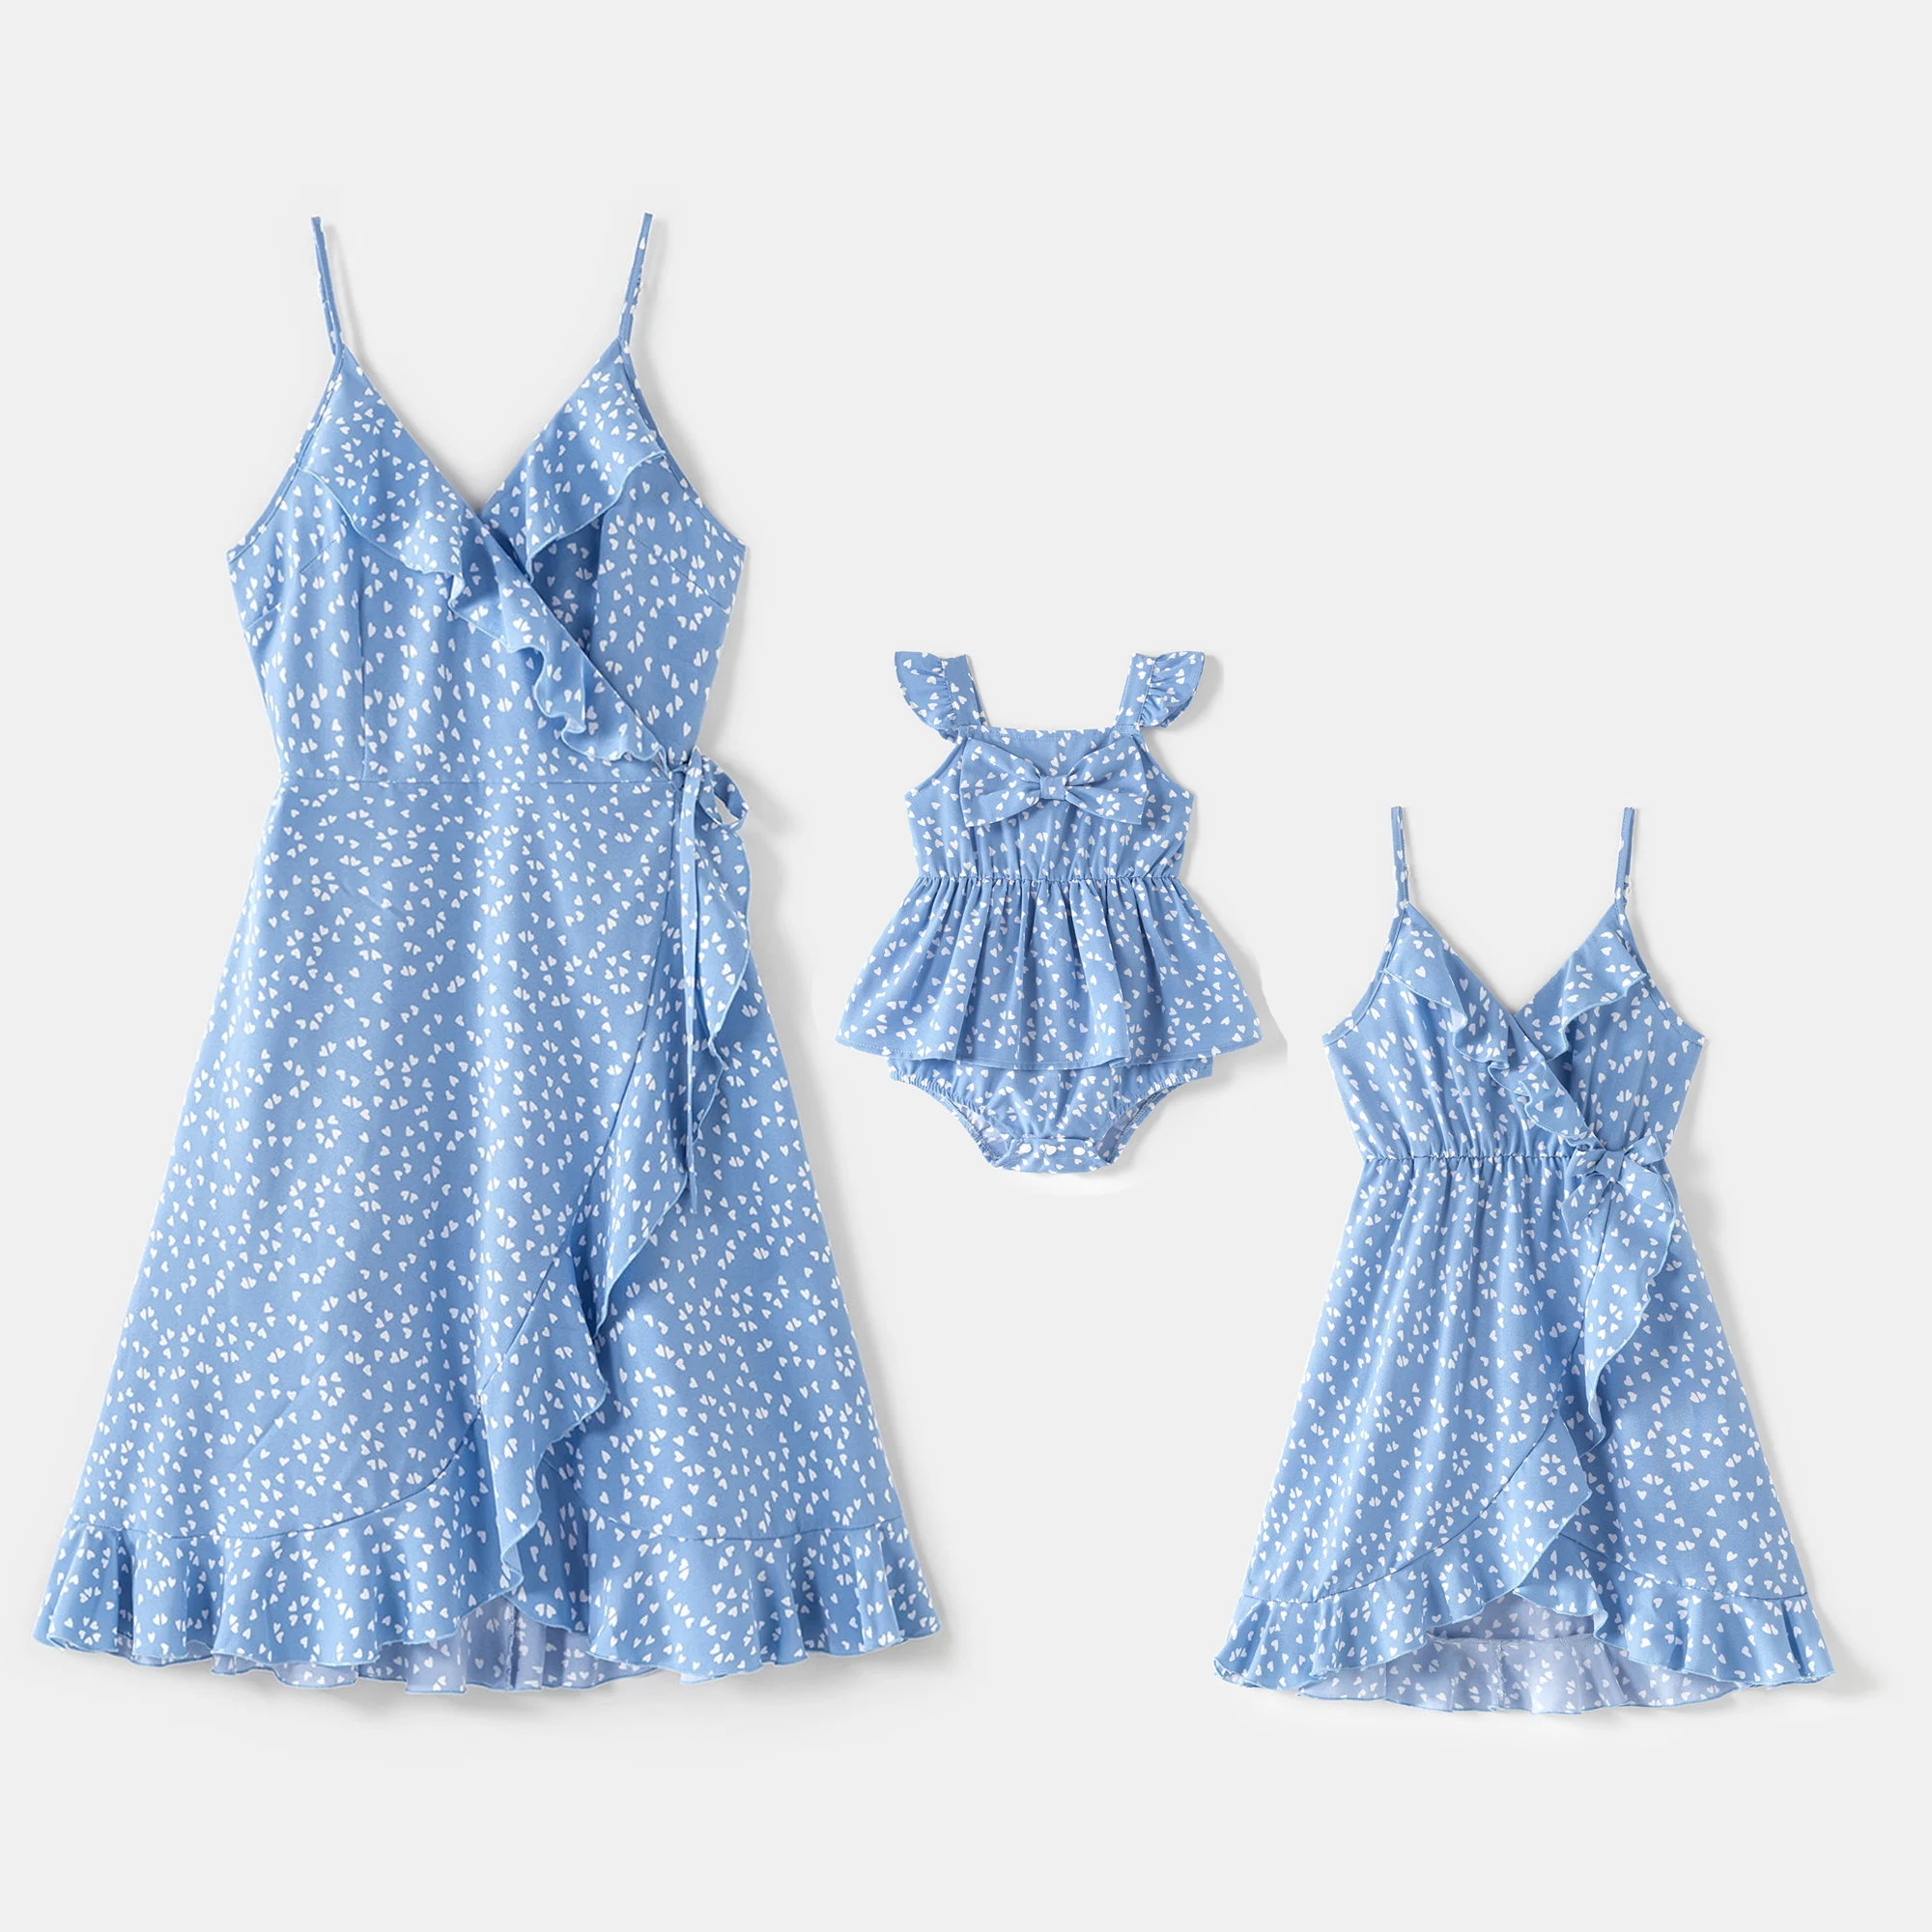 Hearts BLUE casual Mommy and me Dresses, matching outfits, matching dresses - $33.55 - $35.67